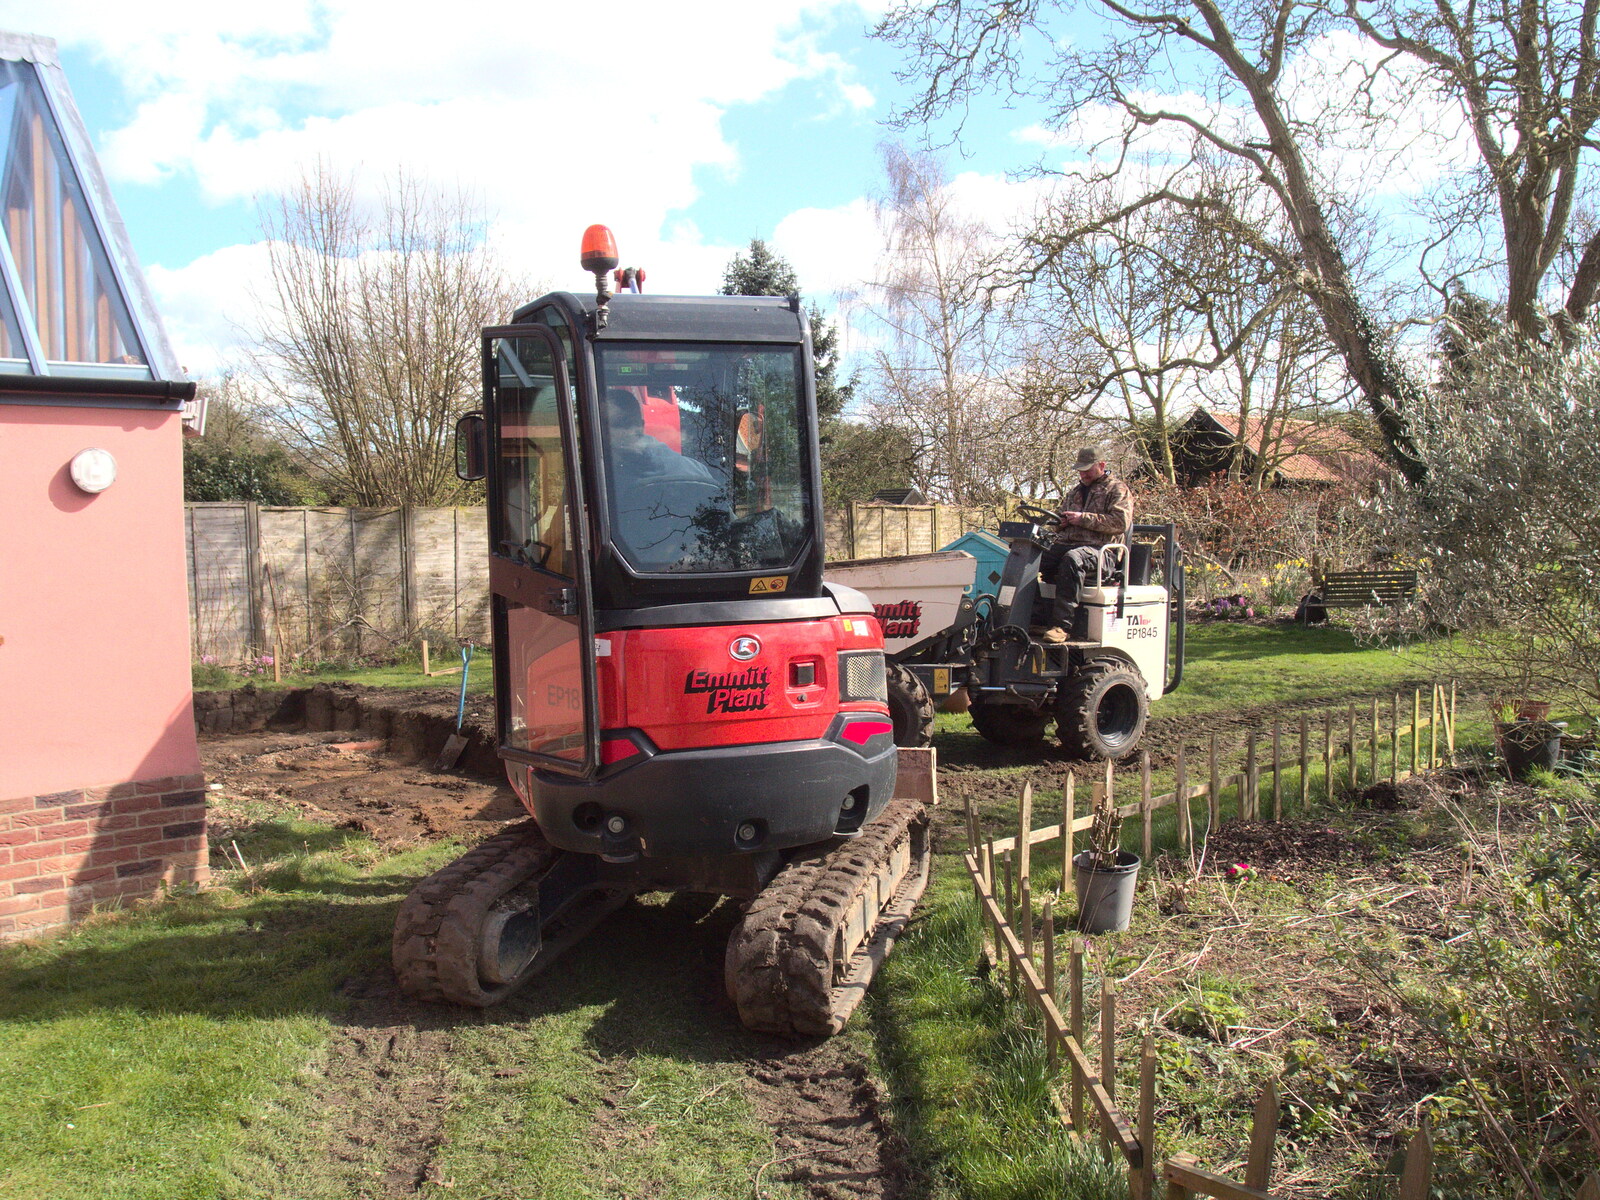 A digger comes to churn the garden up from Digger Action and other March Miscellany, Suffolk and London - 21st March 2017